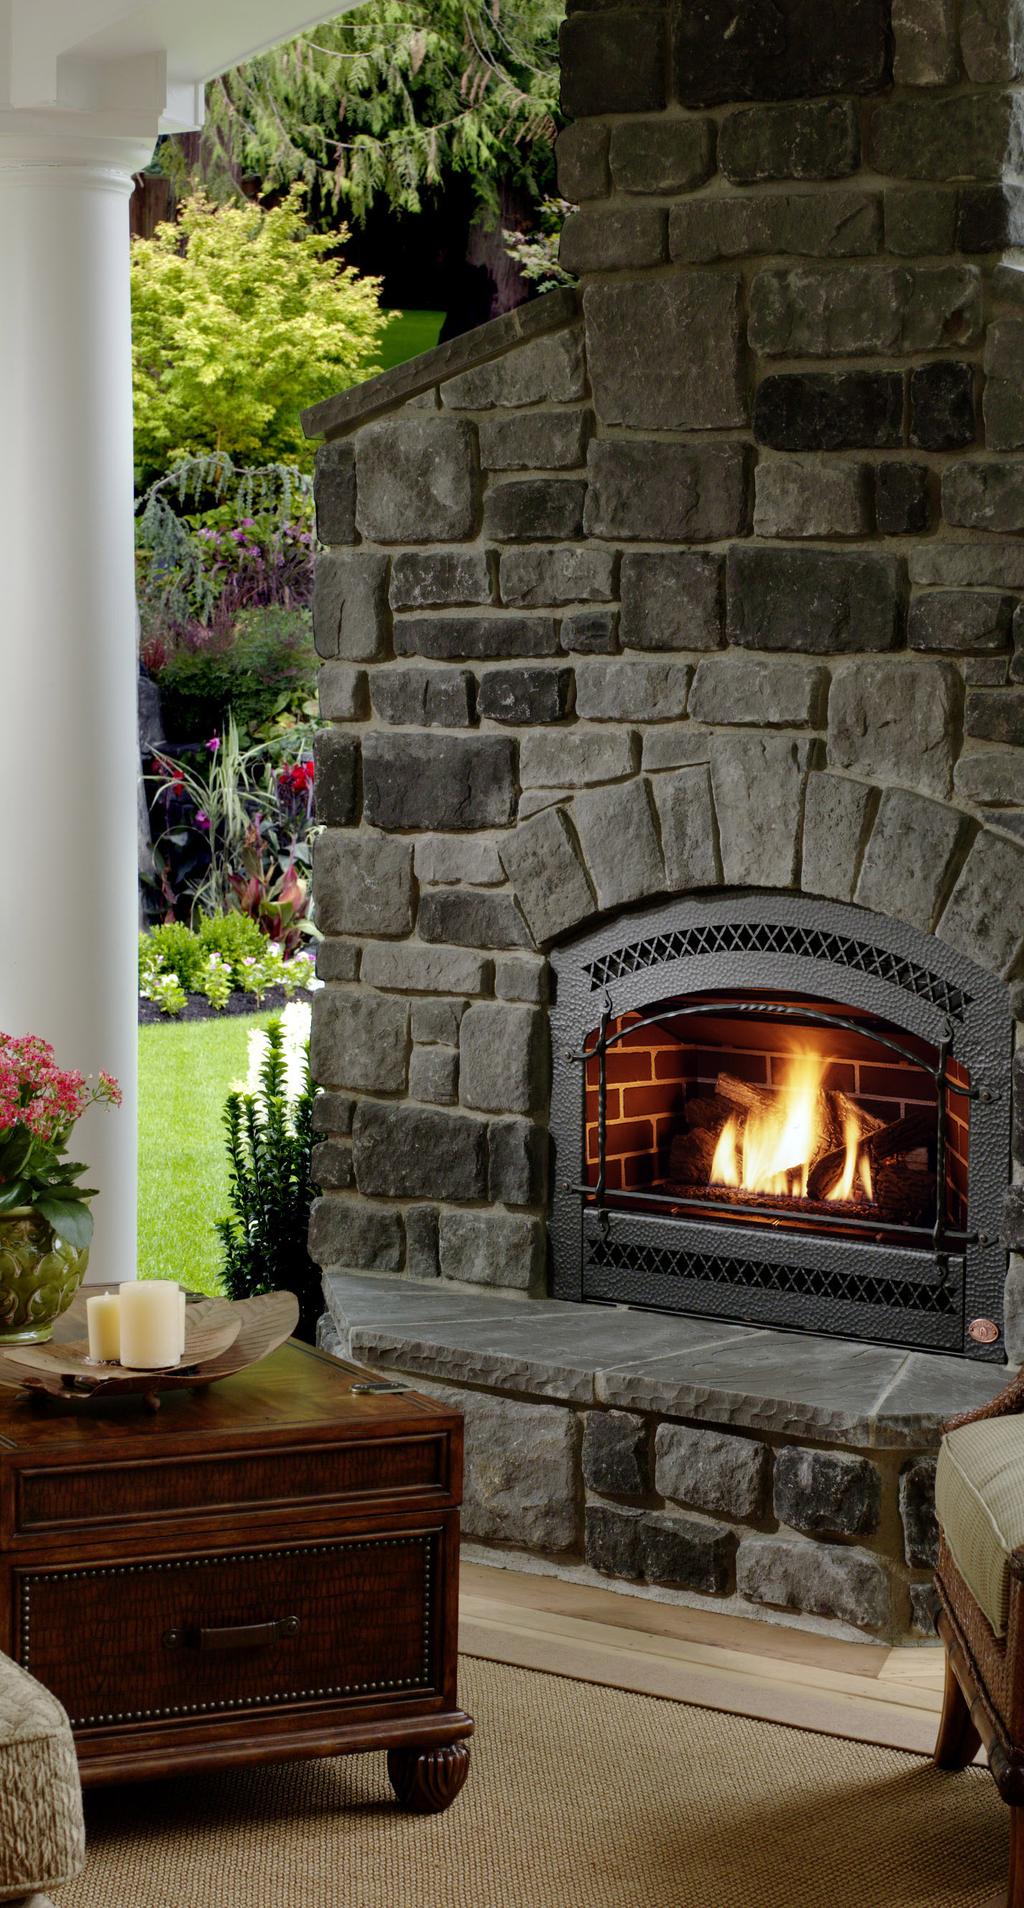 OUTDOOR LIVING ENHANCING YOUR OUTDOOR LIVING SPACE Natural gas outdoor appliances can help expand a home s outdoor living space and provide warmth and comfort that allow the space to be used nearly